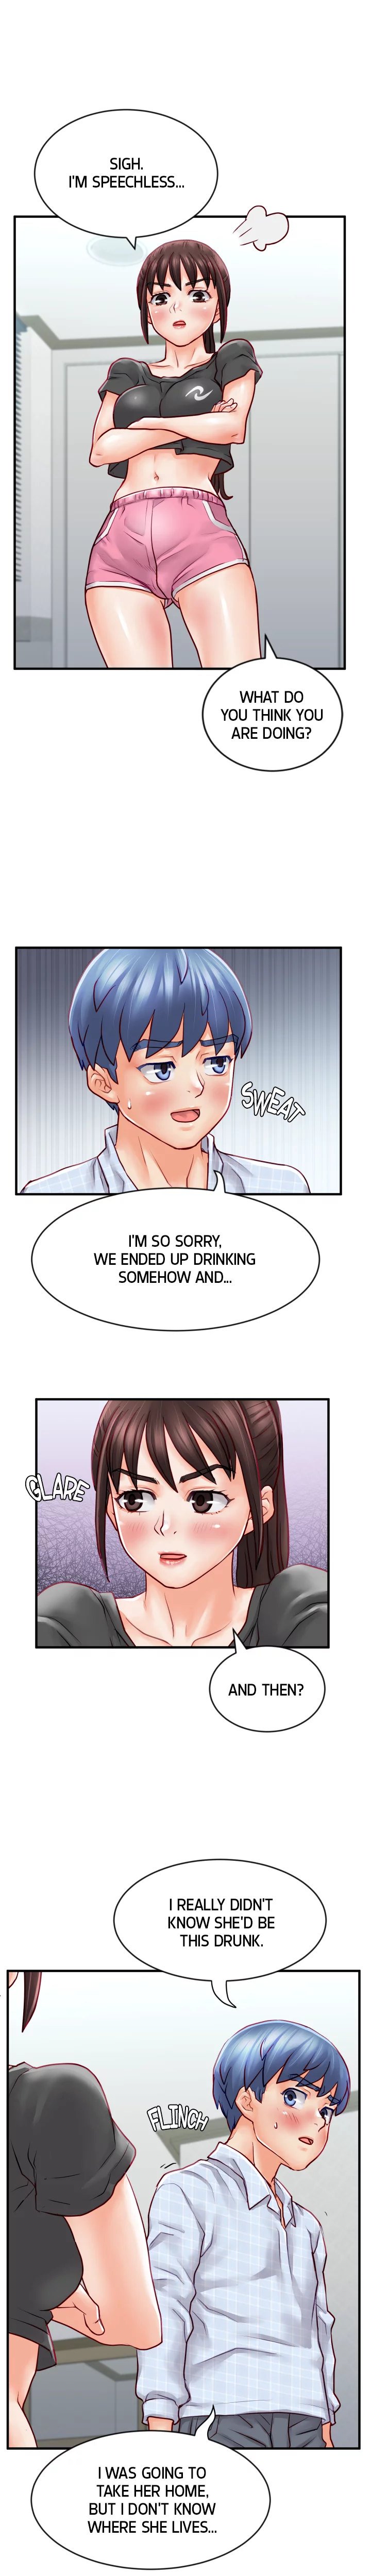 love-is-on-the-air-chap-8-8